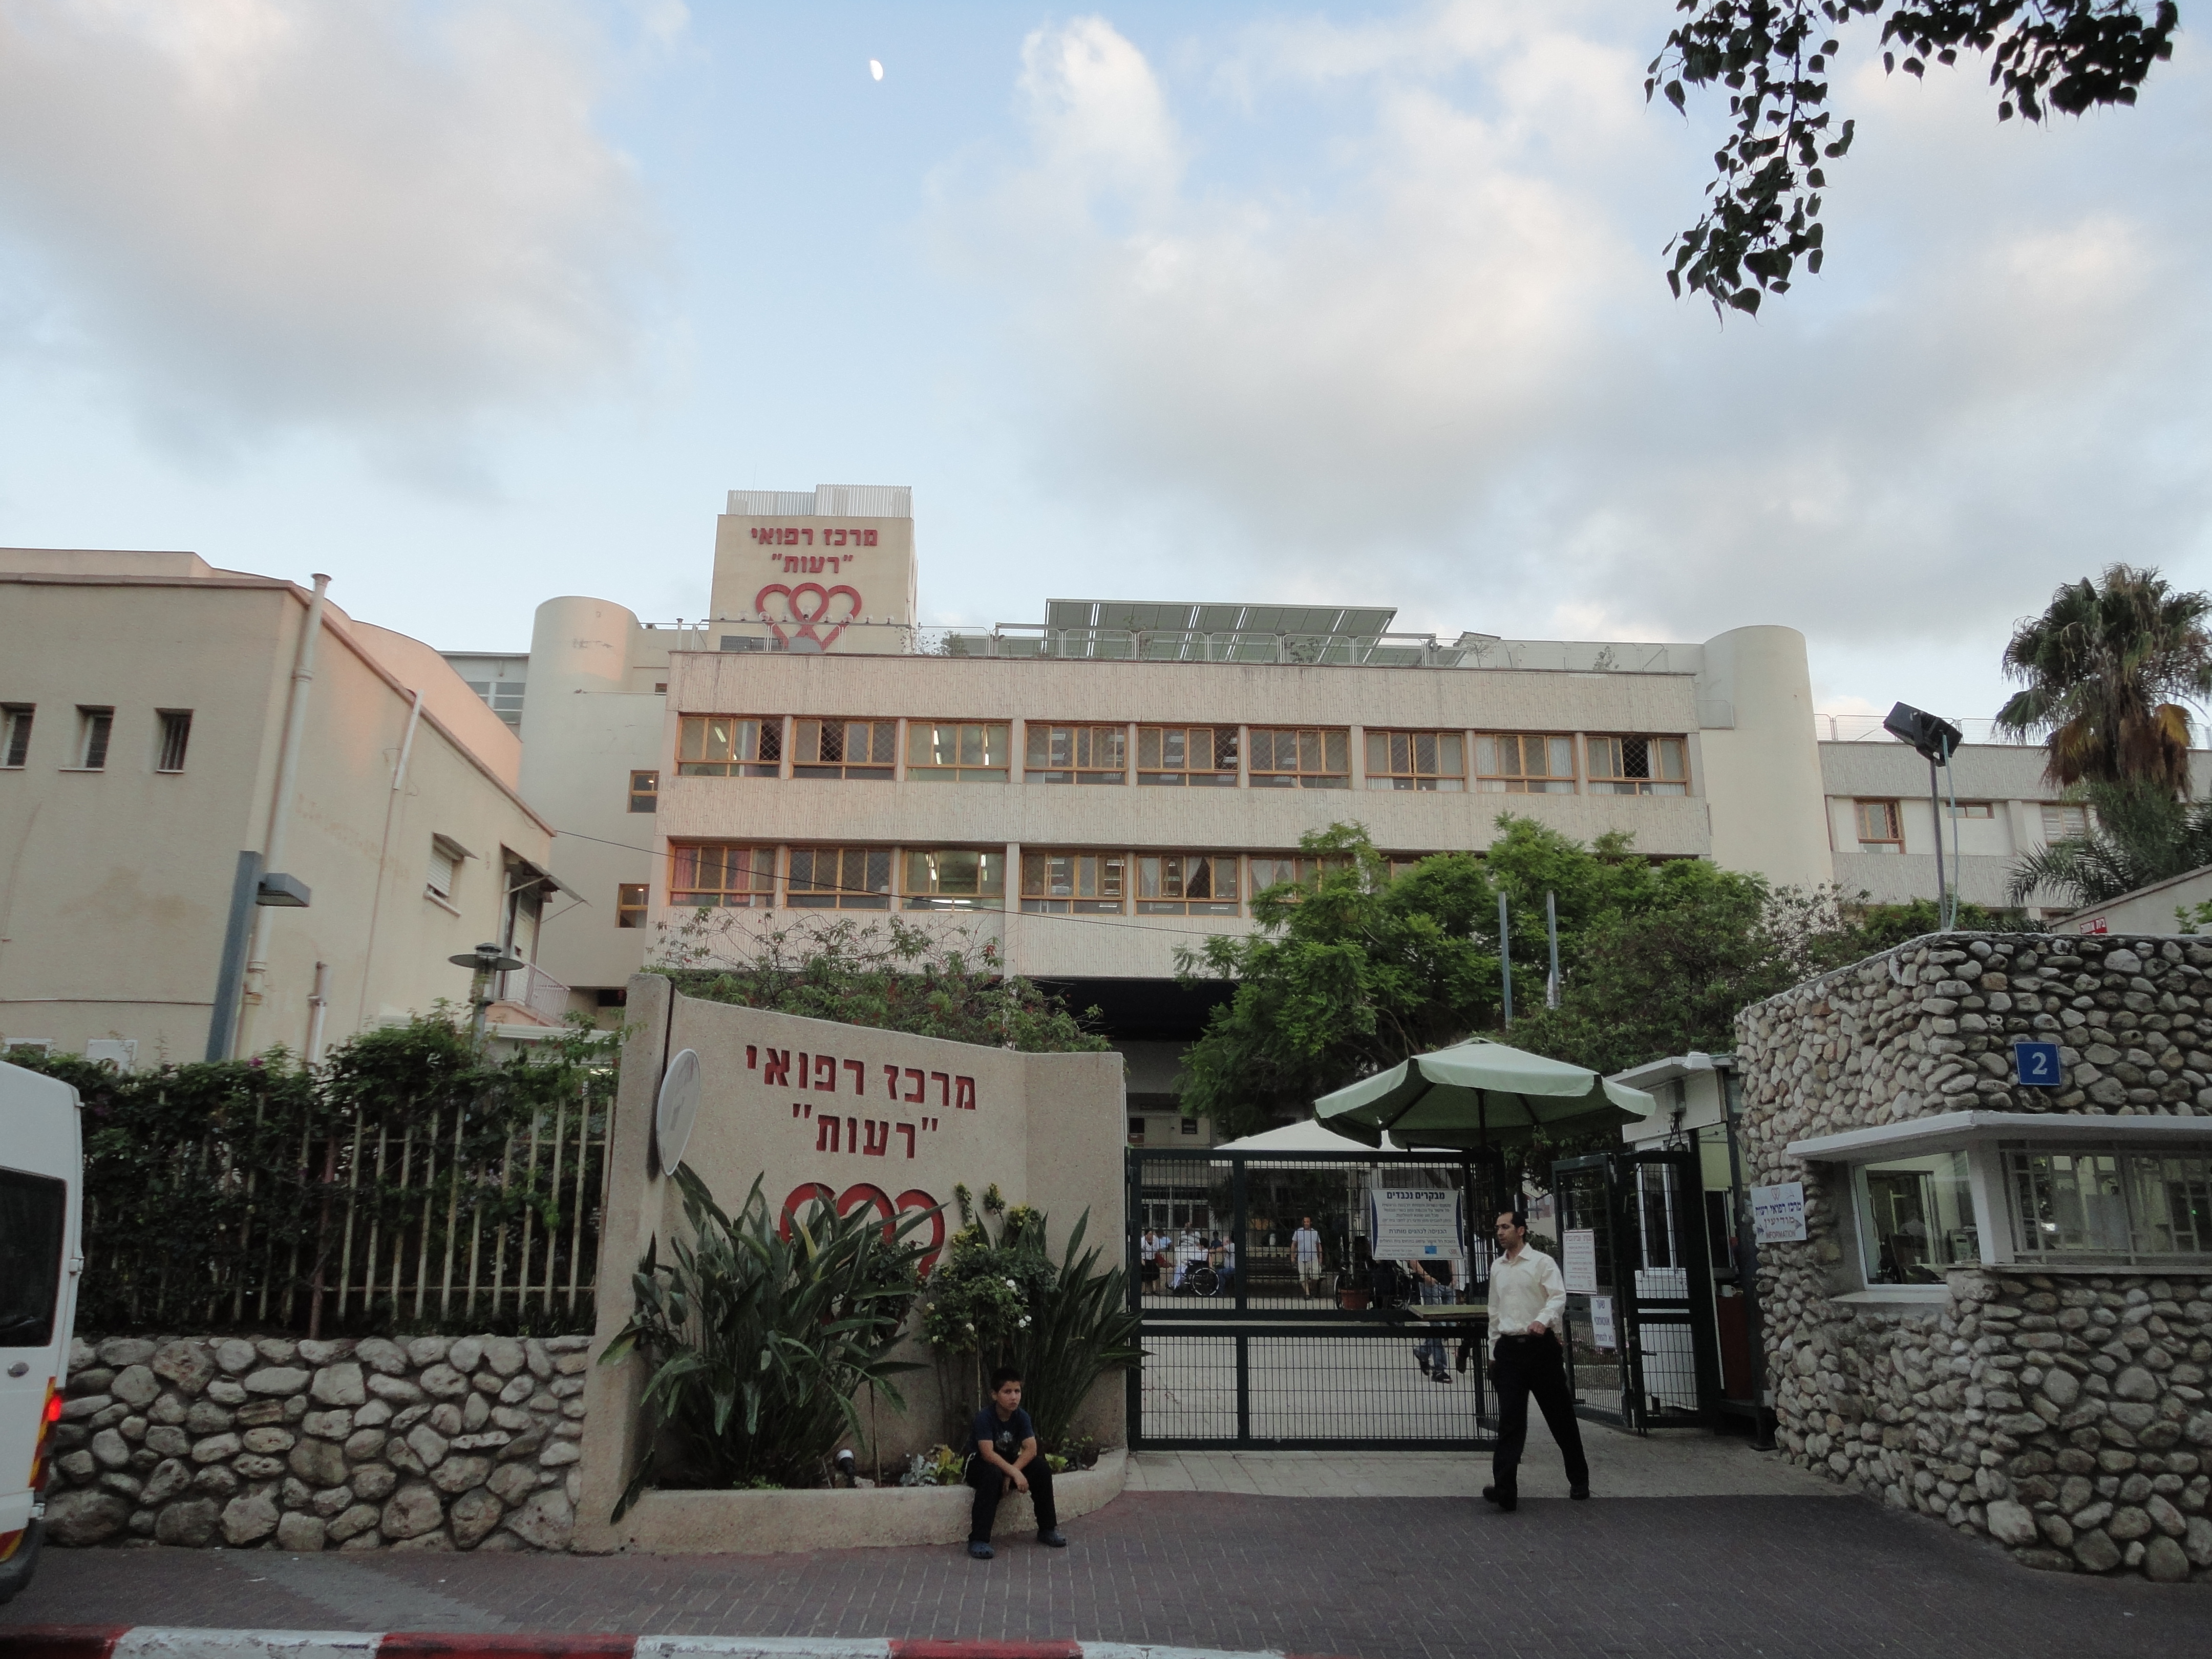 Figure 2 - Rueth Hospital in Tel Aviv, Israel, was the site of the first installation of Cupron Enhanced Eos outside of the United States. The facility stands on the edge of the city and was originally built to offer healthcare to survivors of the Holocau